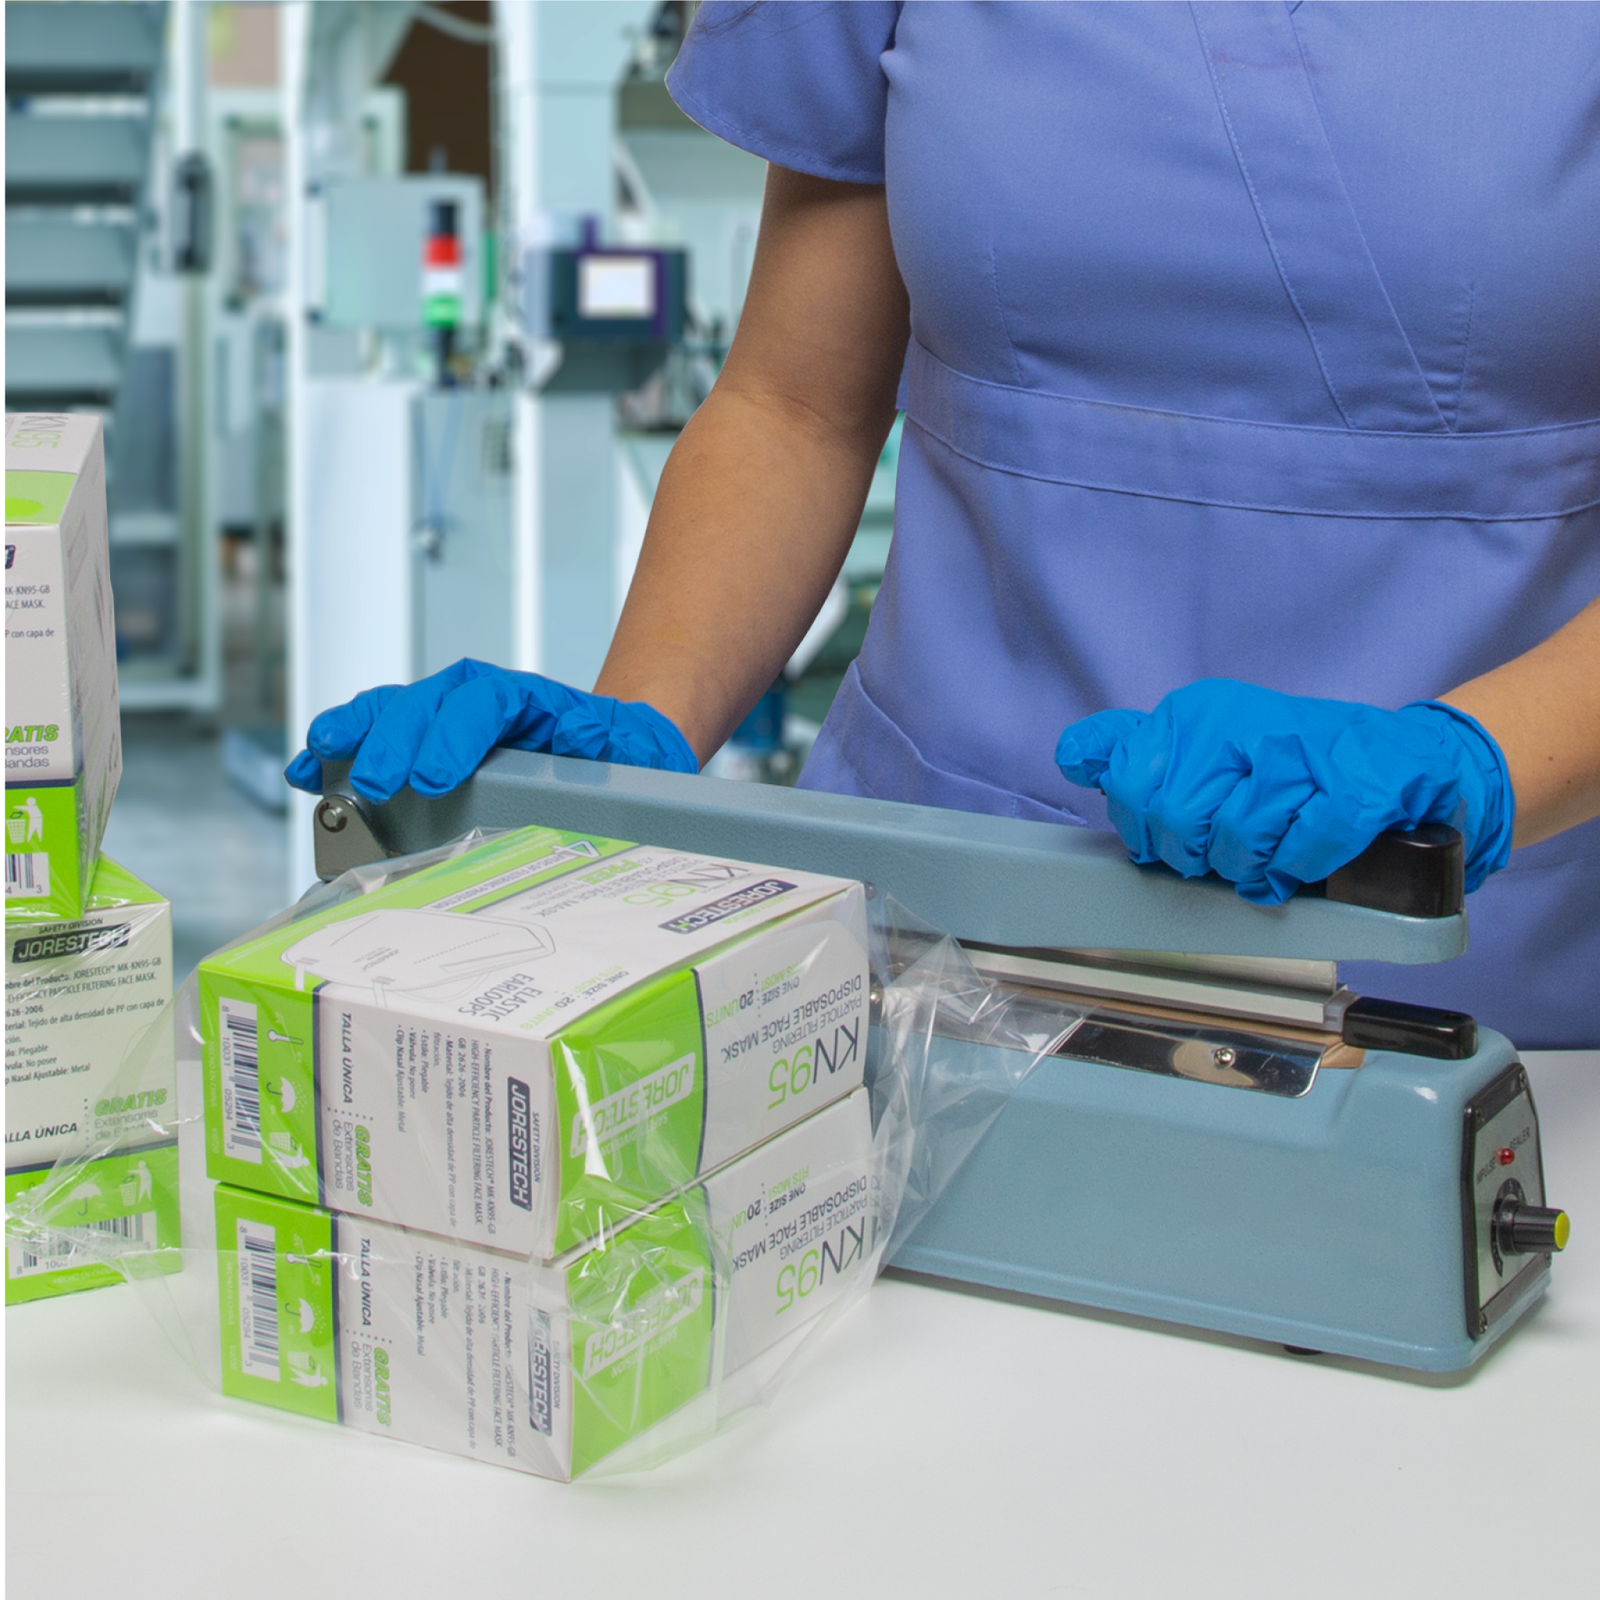 Medical environment. A nurse is sealing a sealable bag with two boxes of face masks using the 12 inch manual impulse sealer